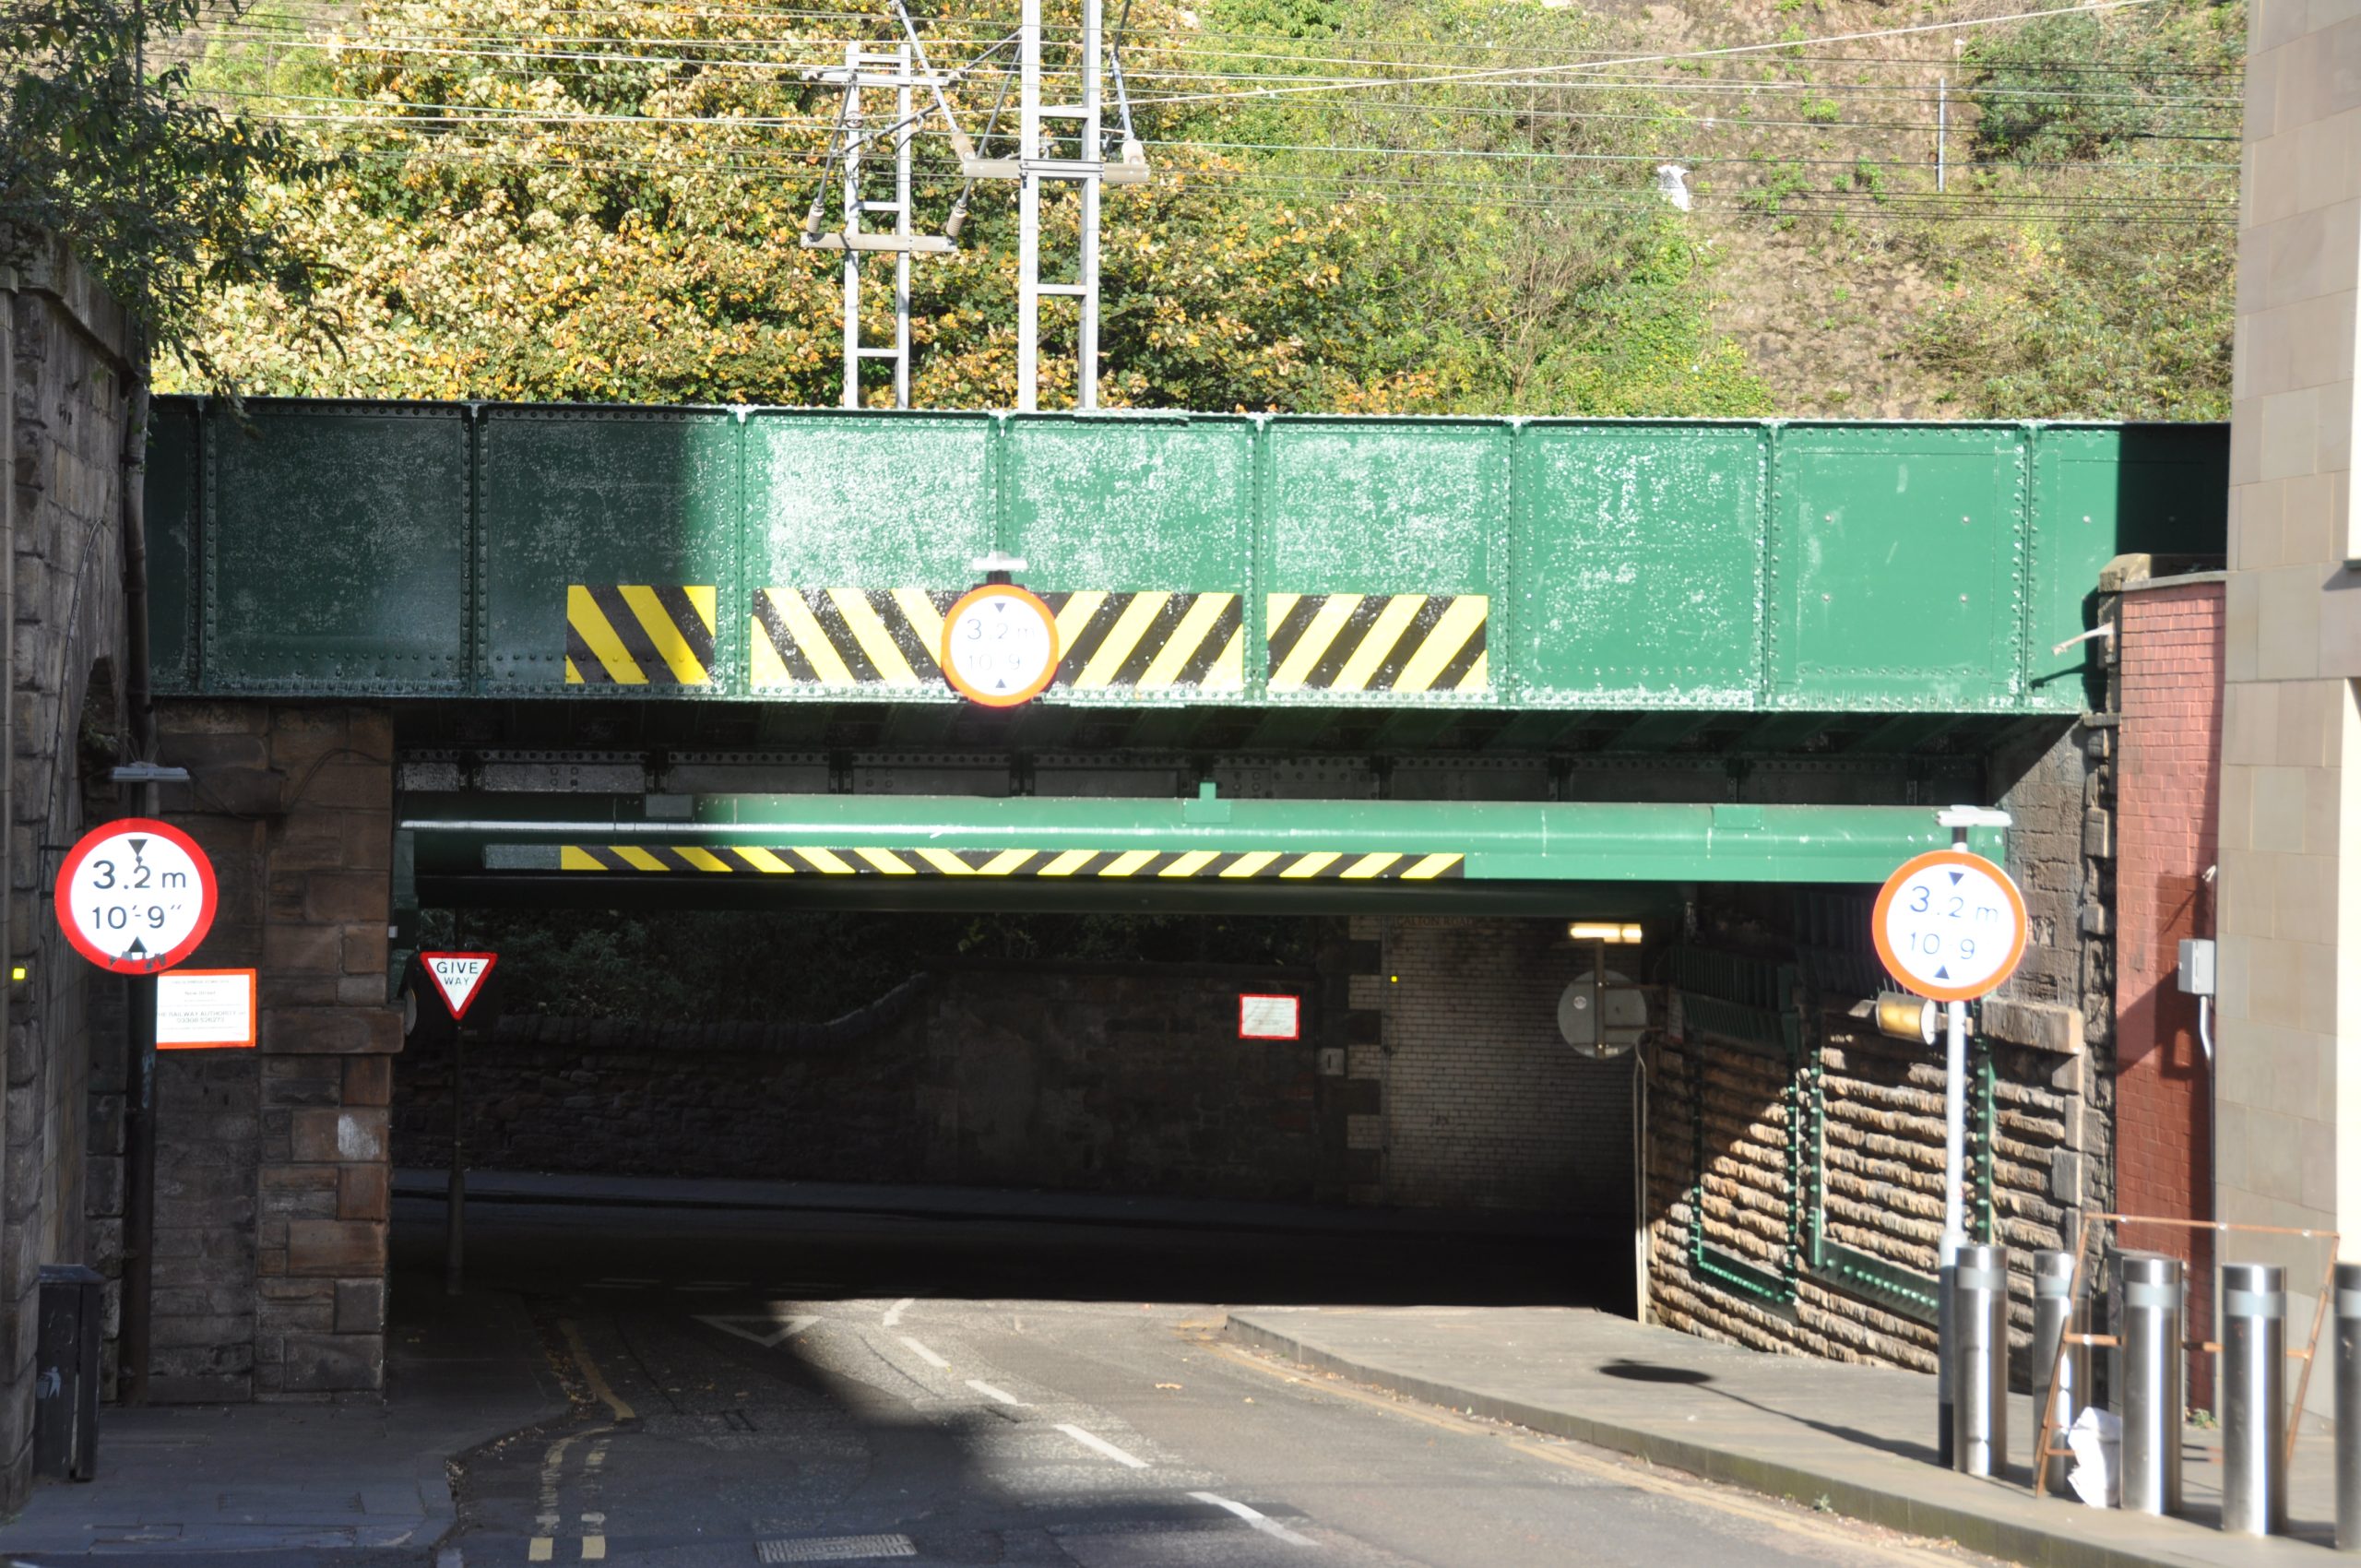 The recently renovated New Street Bridge in Edinburgh. Painted green with yellow and black warning stripes (Network Rail image)